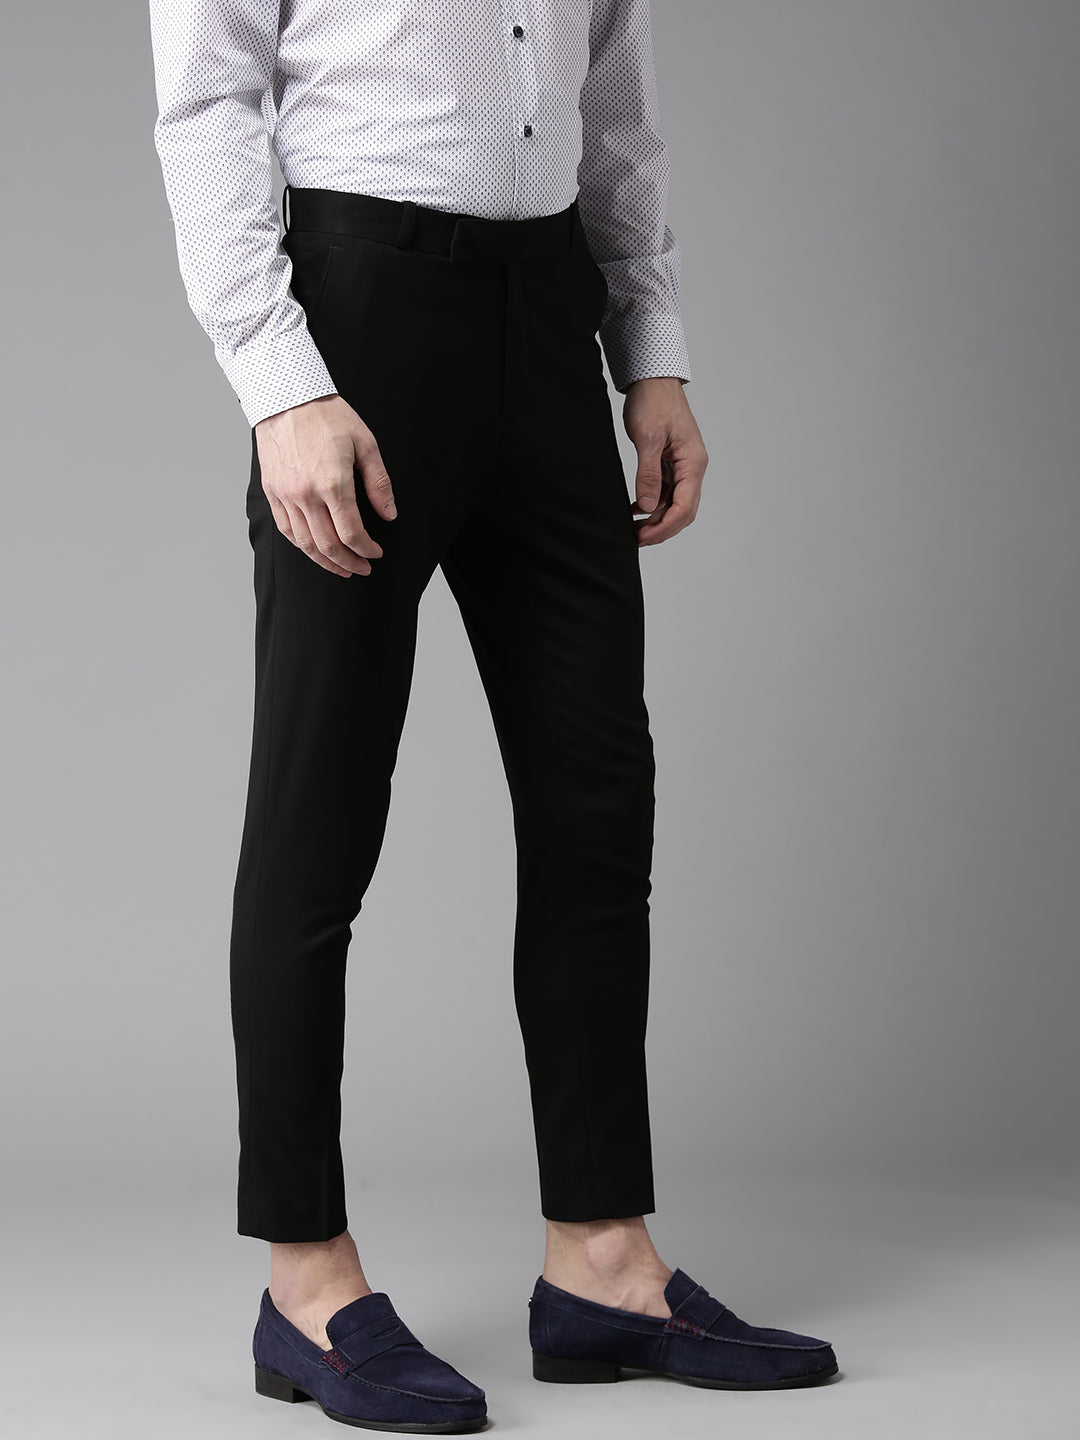 Buy Superstar Black Ribbed Cross Waistband Trousers from Westside